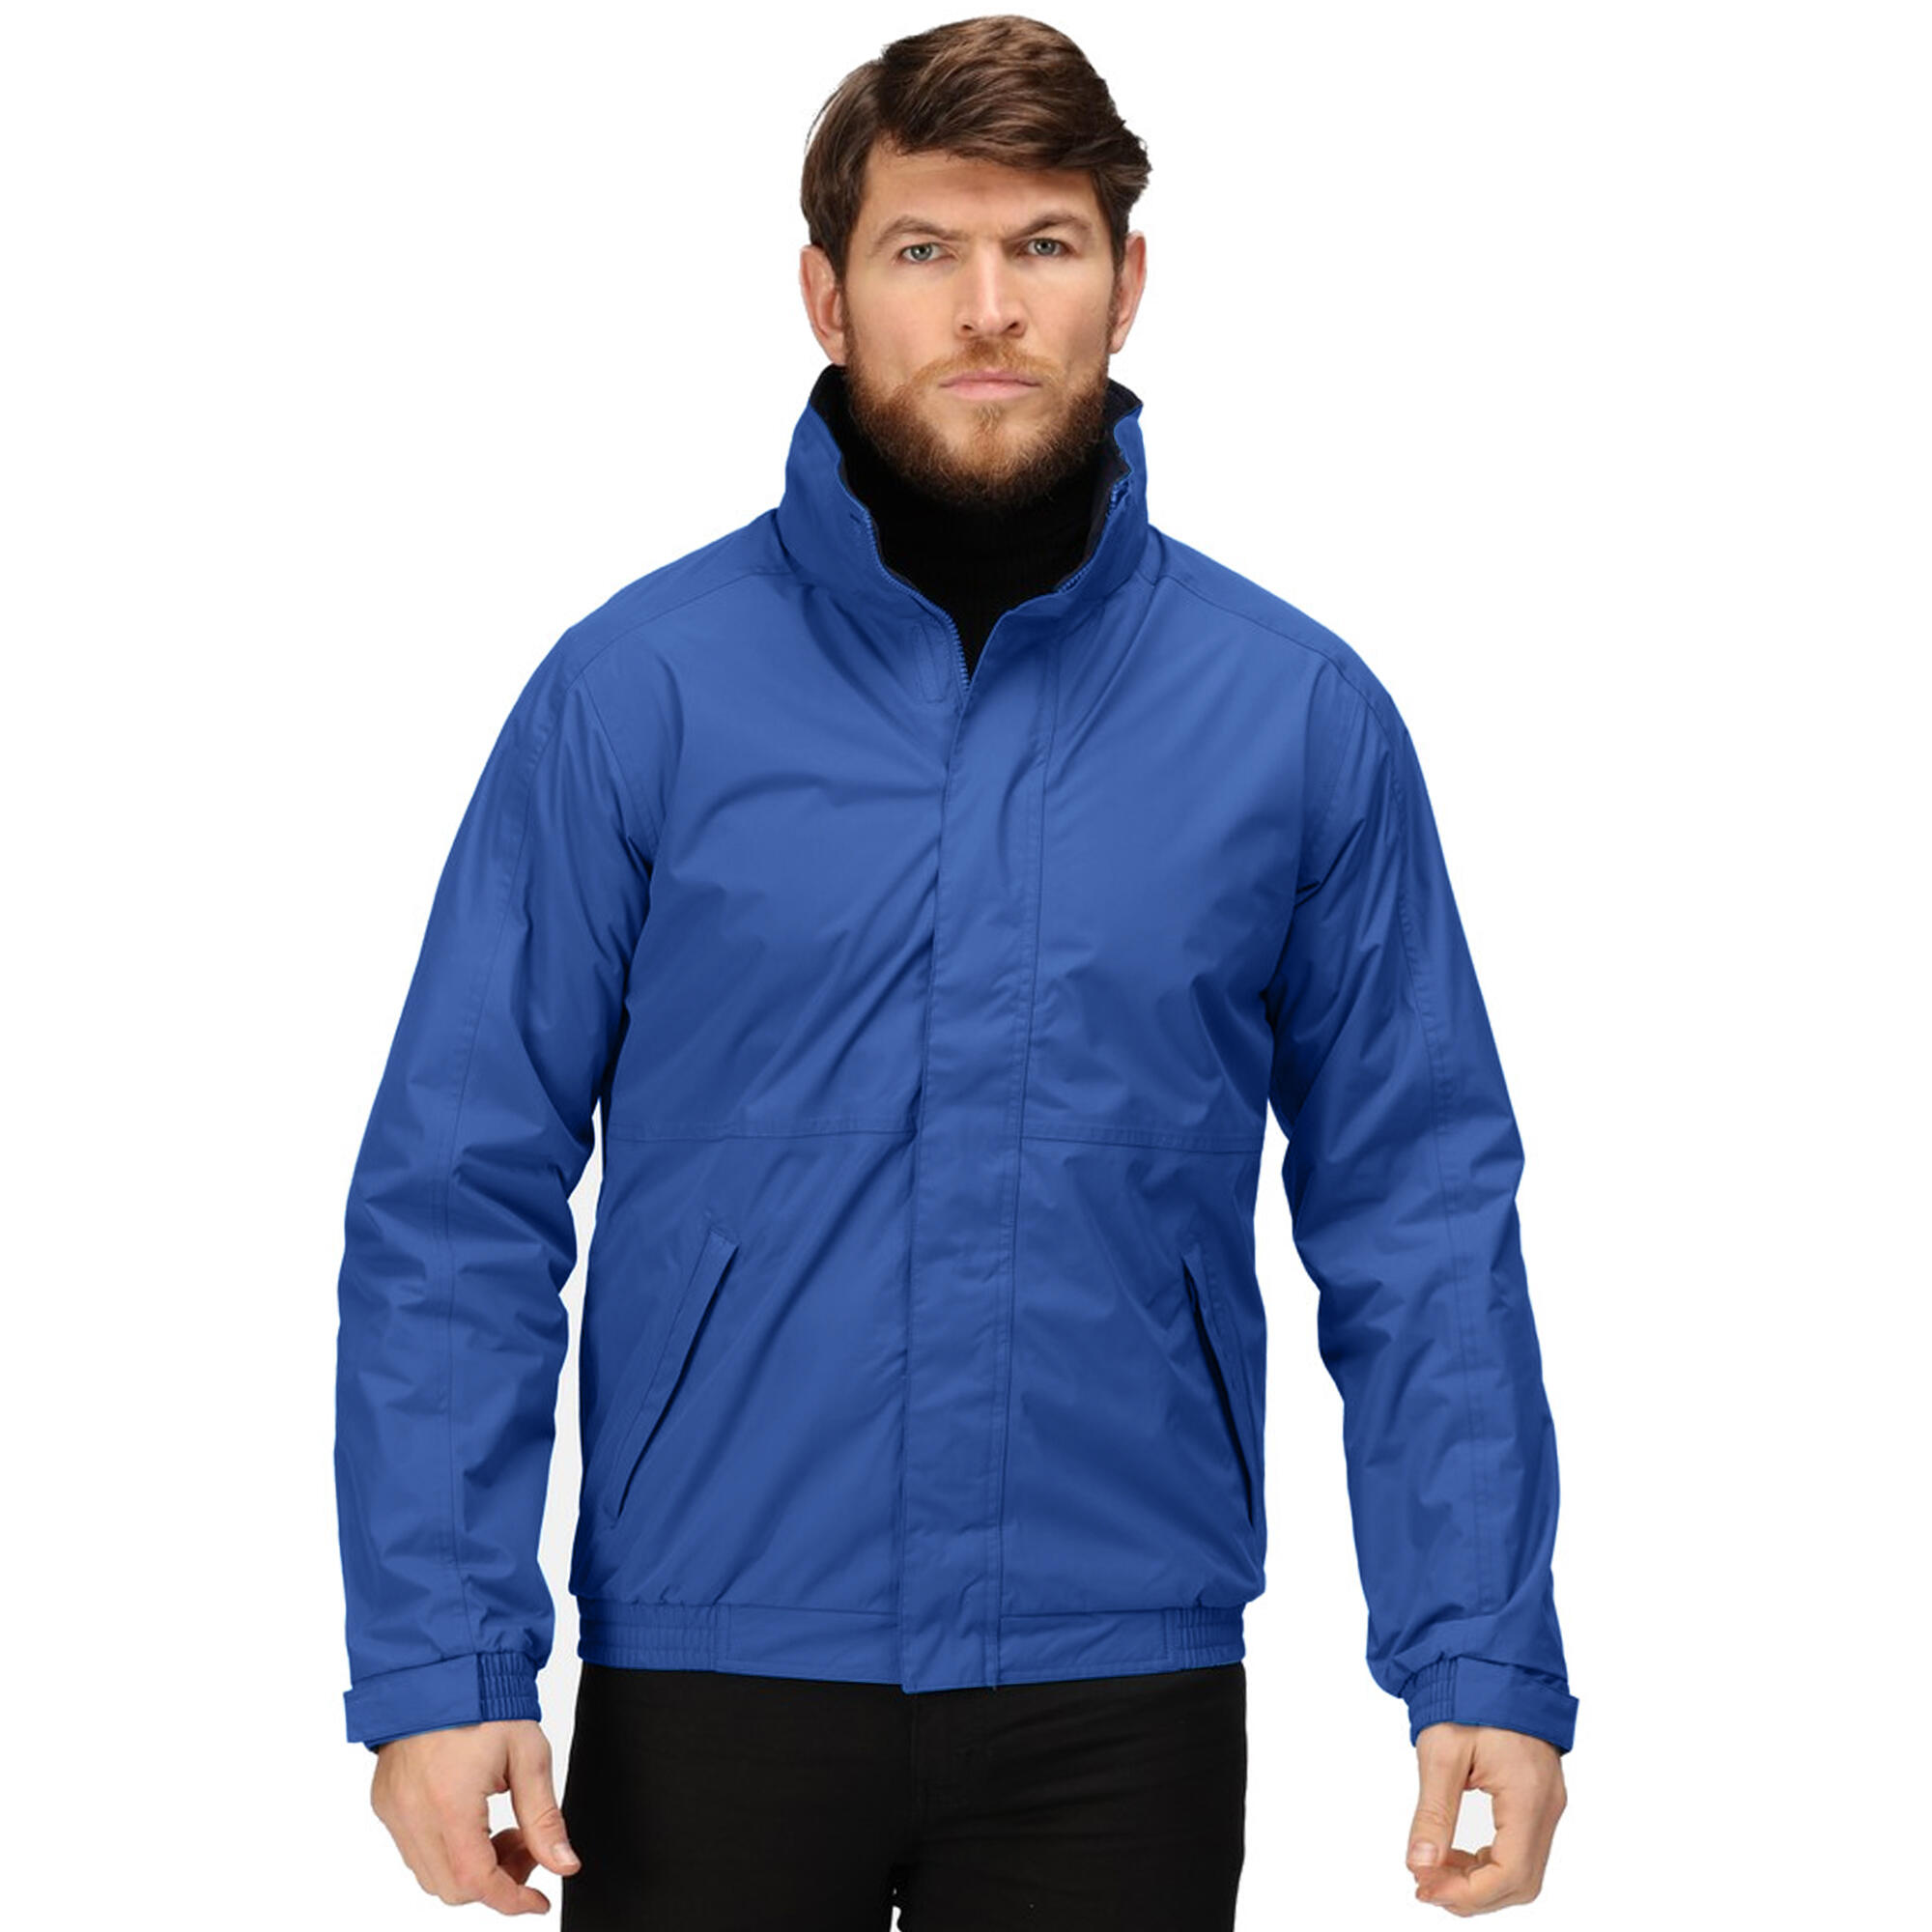 Dover Waterproof Windproof Jacket (ThermoGuard Insulation) (Royal Blue/Navy) 3/4